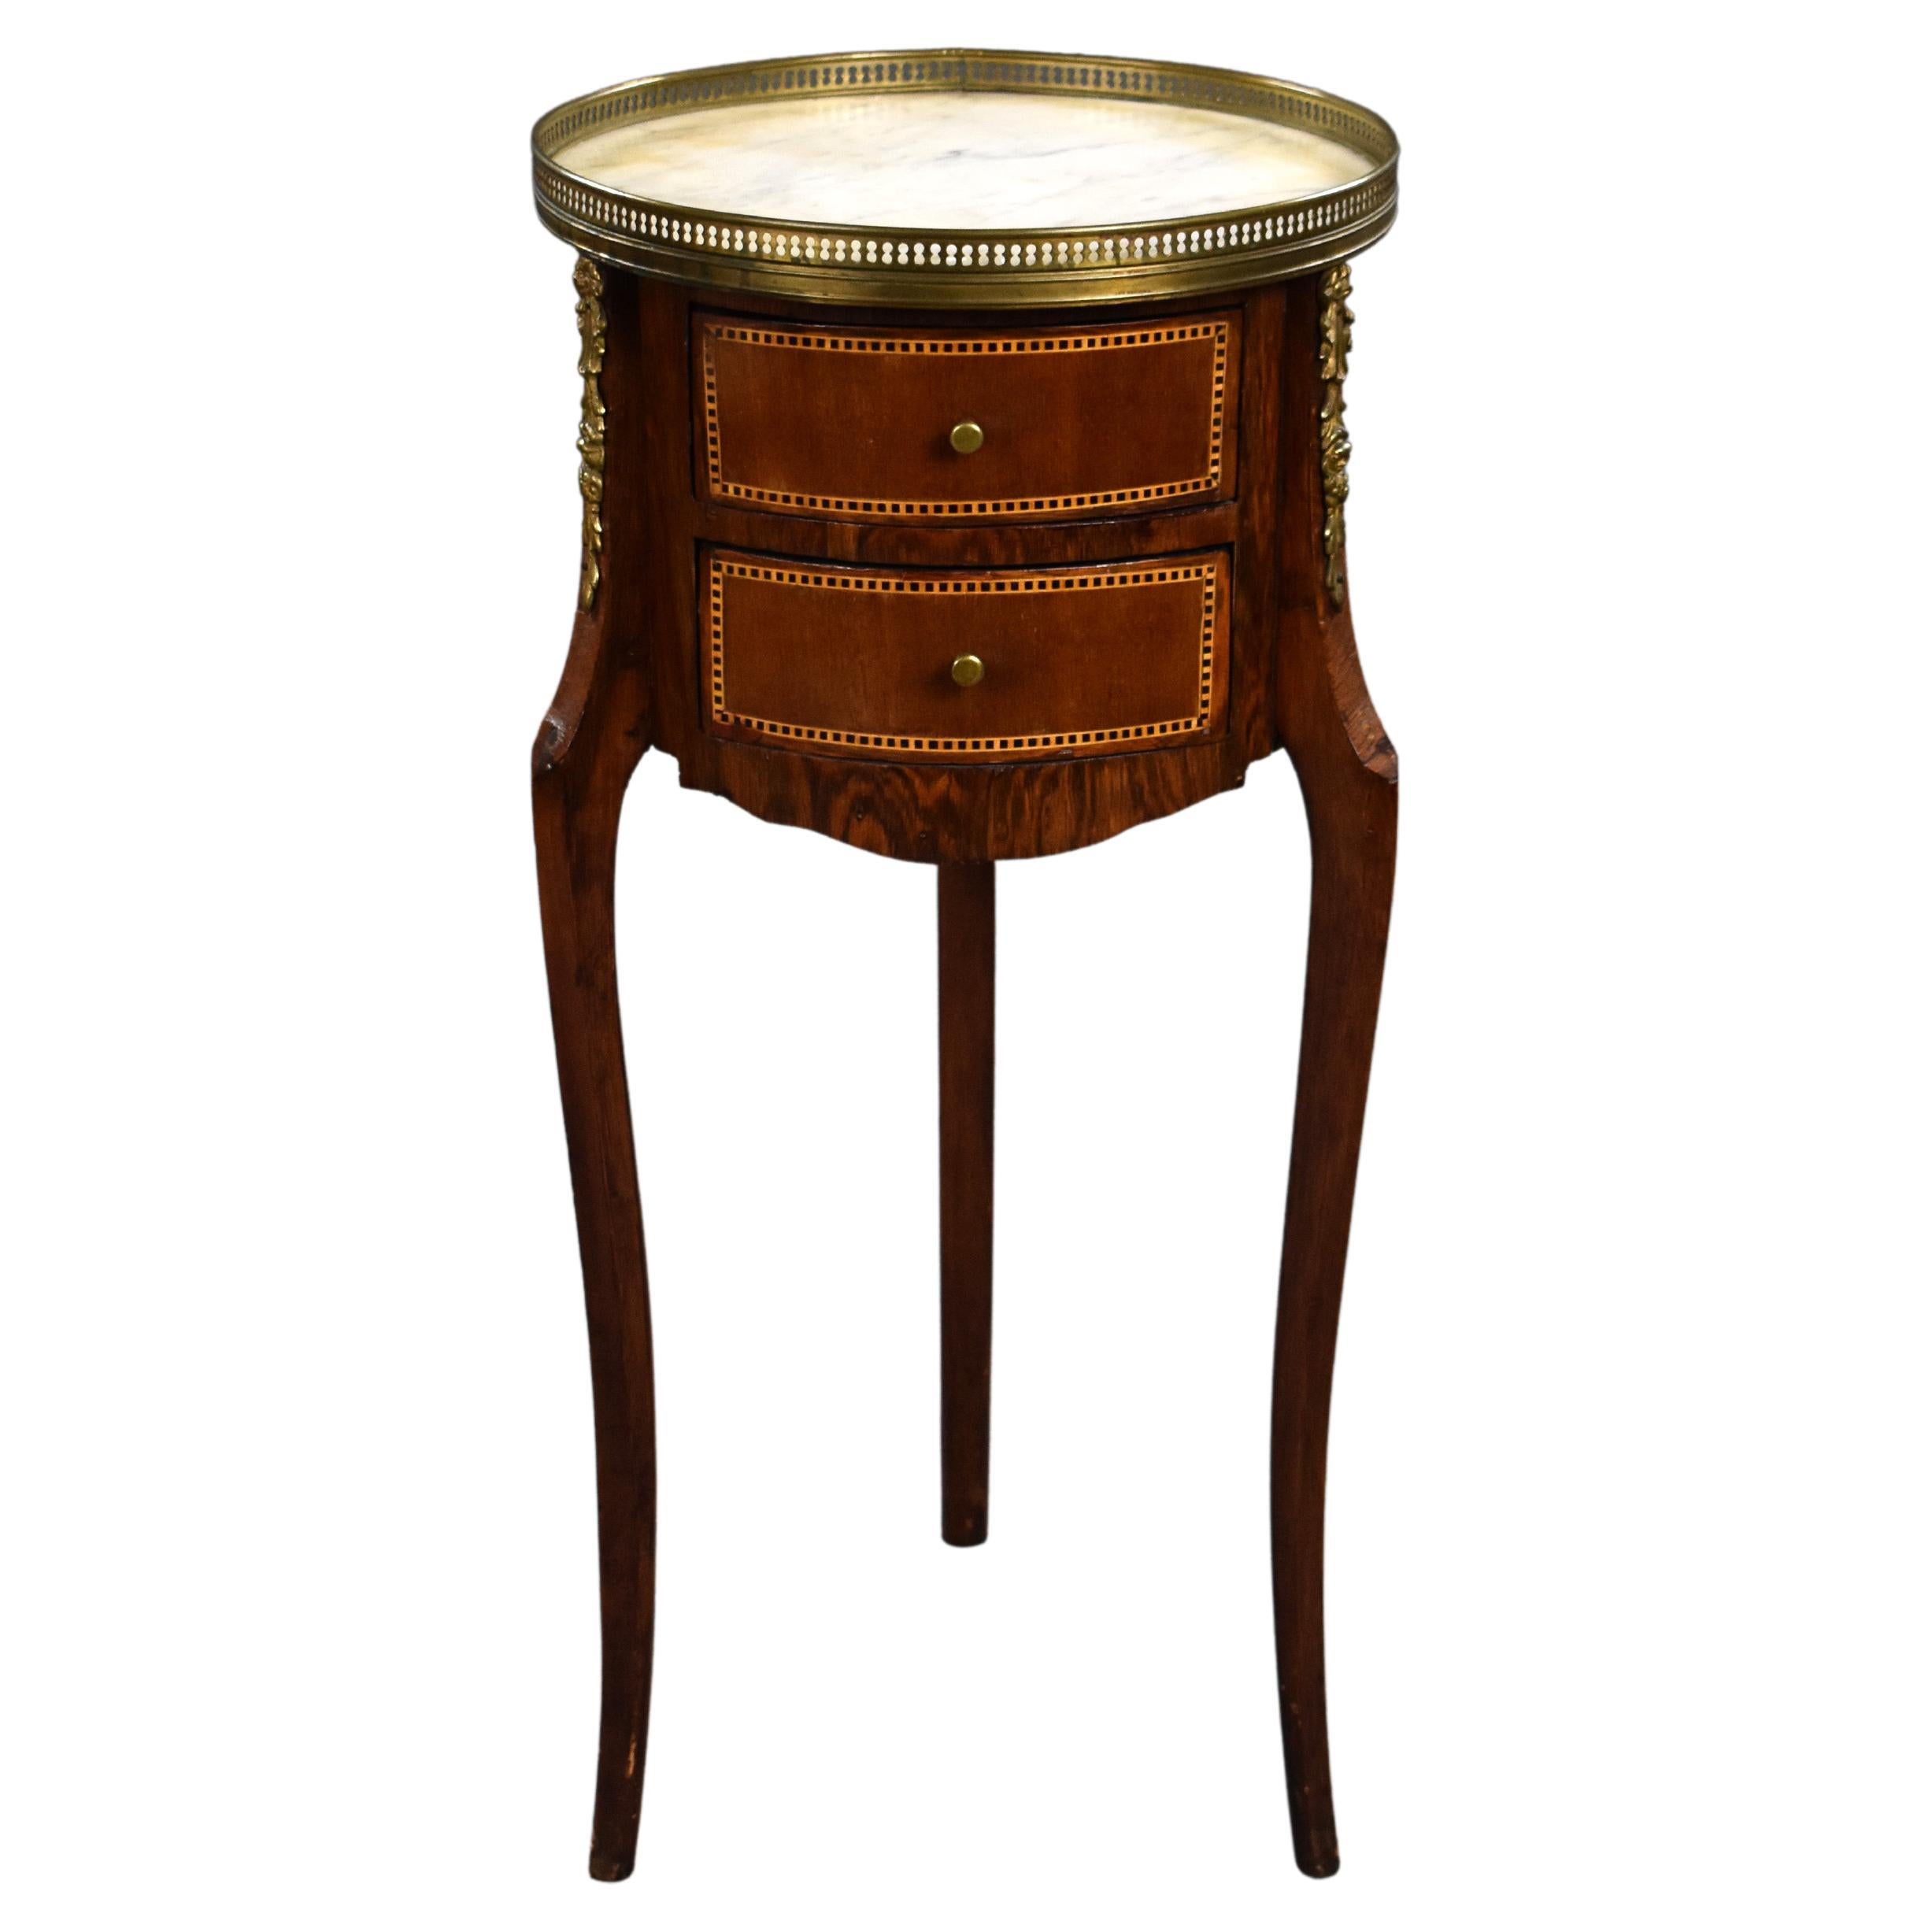 19th Century French Mahogany Inlaid Occasional Table